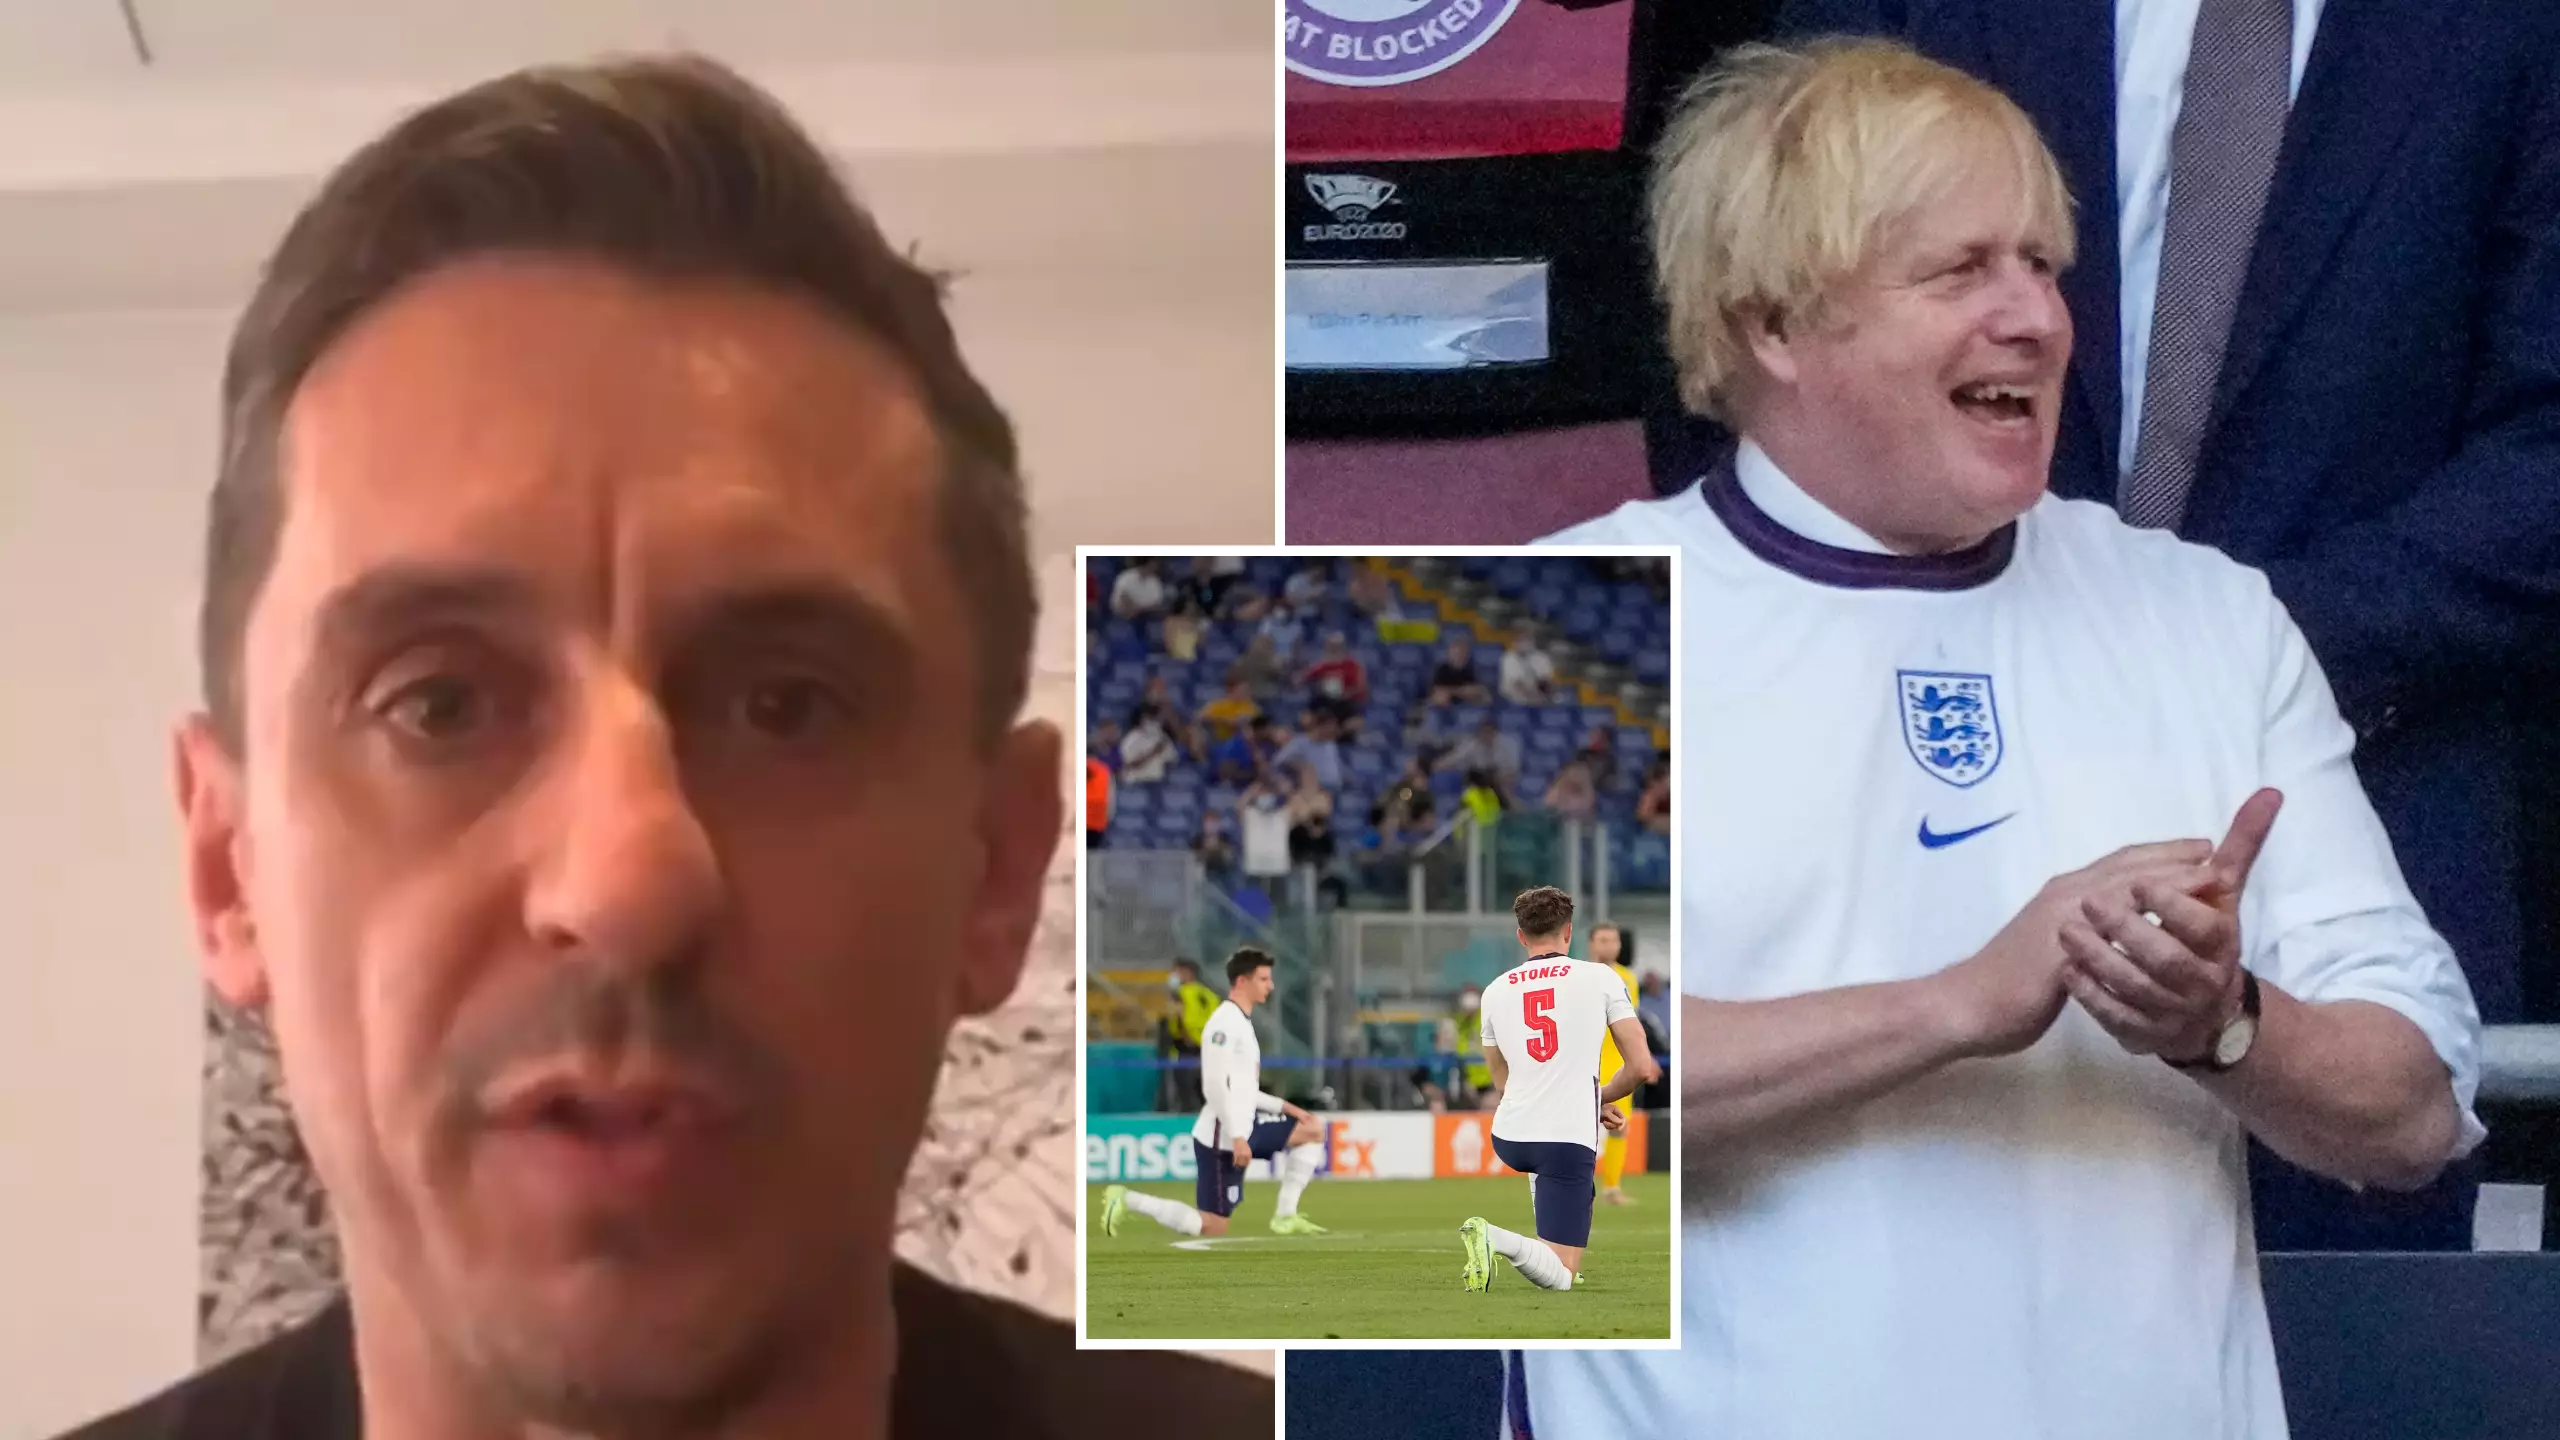 Gary Neville Dismantles 'Liar' Boris Johnson In Fresh Attack Over Taking The Knee Comments